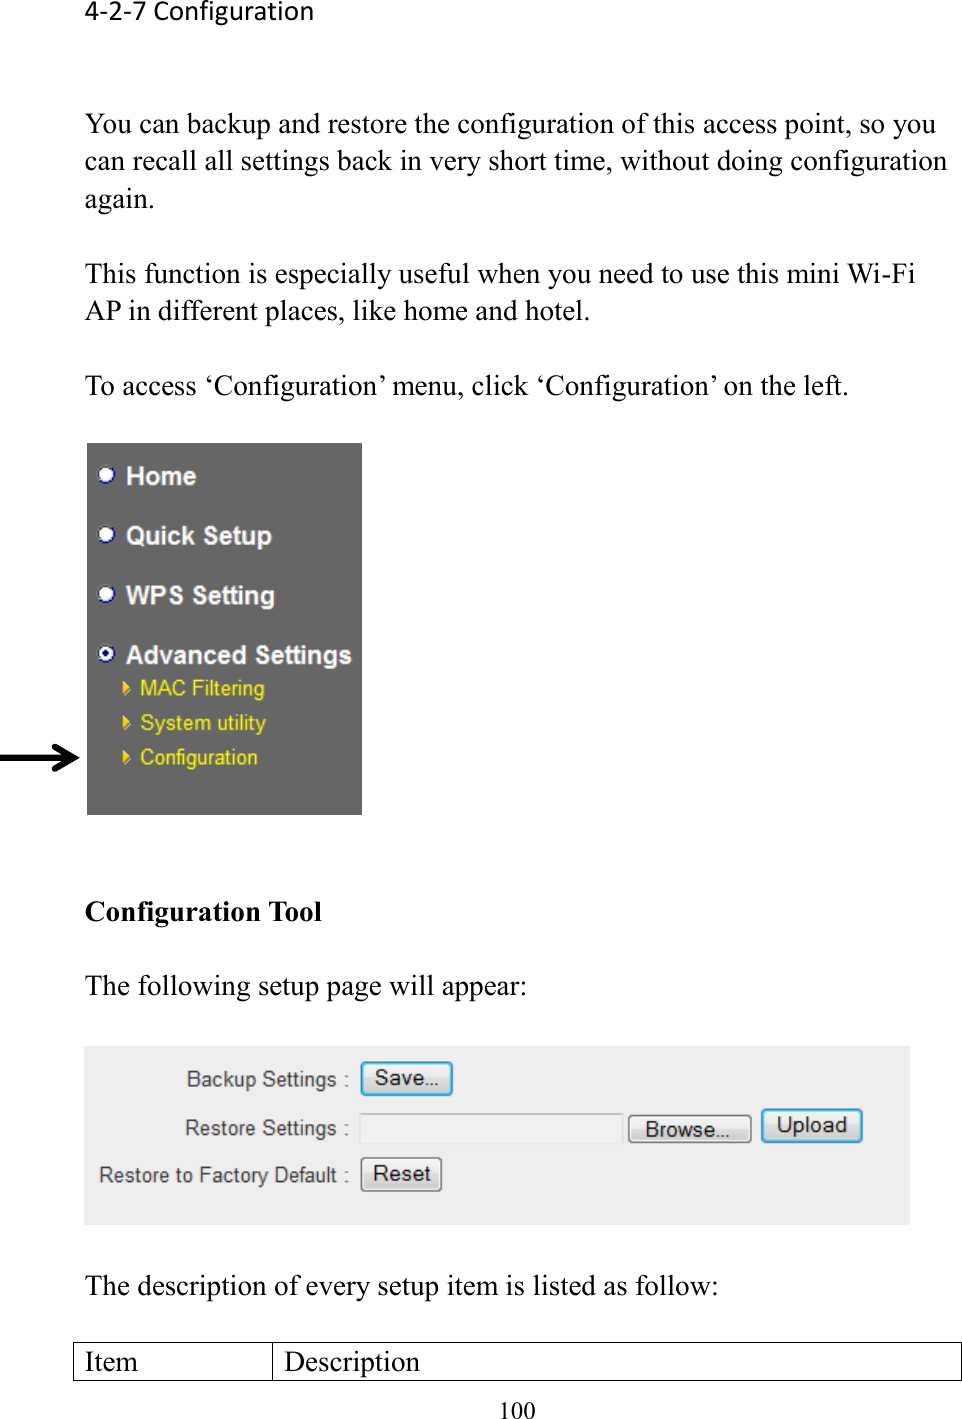  100  4-2-7 Configuration  You can backup and restore the configuration of this access point, so you can recall all settings back in very short time, without doing configuration again.    This function is especially useful when you need to use this mini Wi-Fi AP in different places, like home and hotel.  To access ‘Configuration’ menu, click ‘Configuration’ on the left.     Configuration Tool  The following setup page will appear:    The description of every setup item is listed as follow:  Item Description 